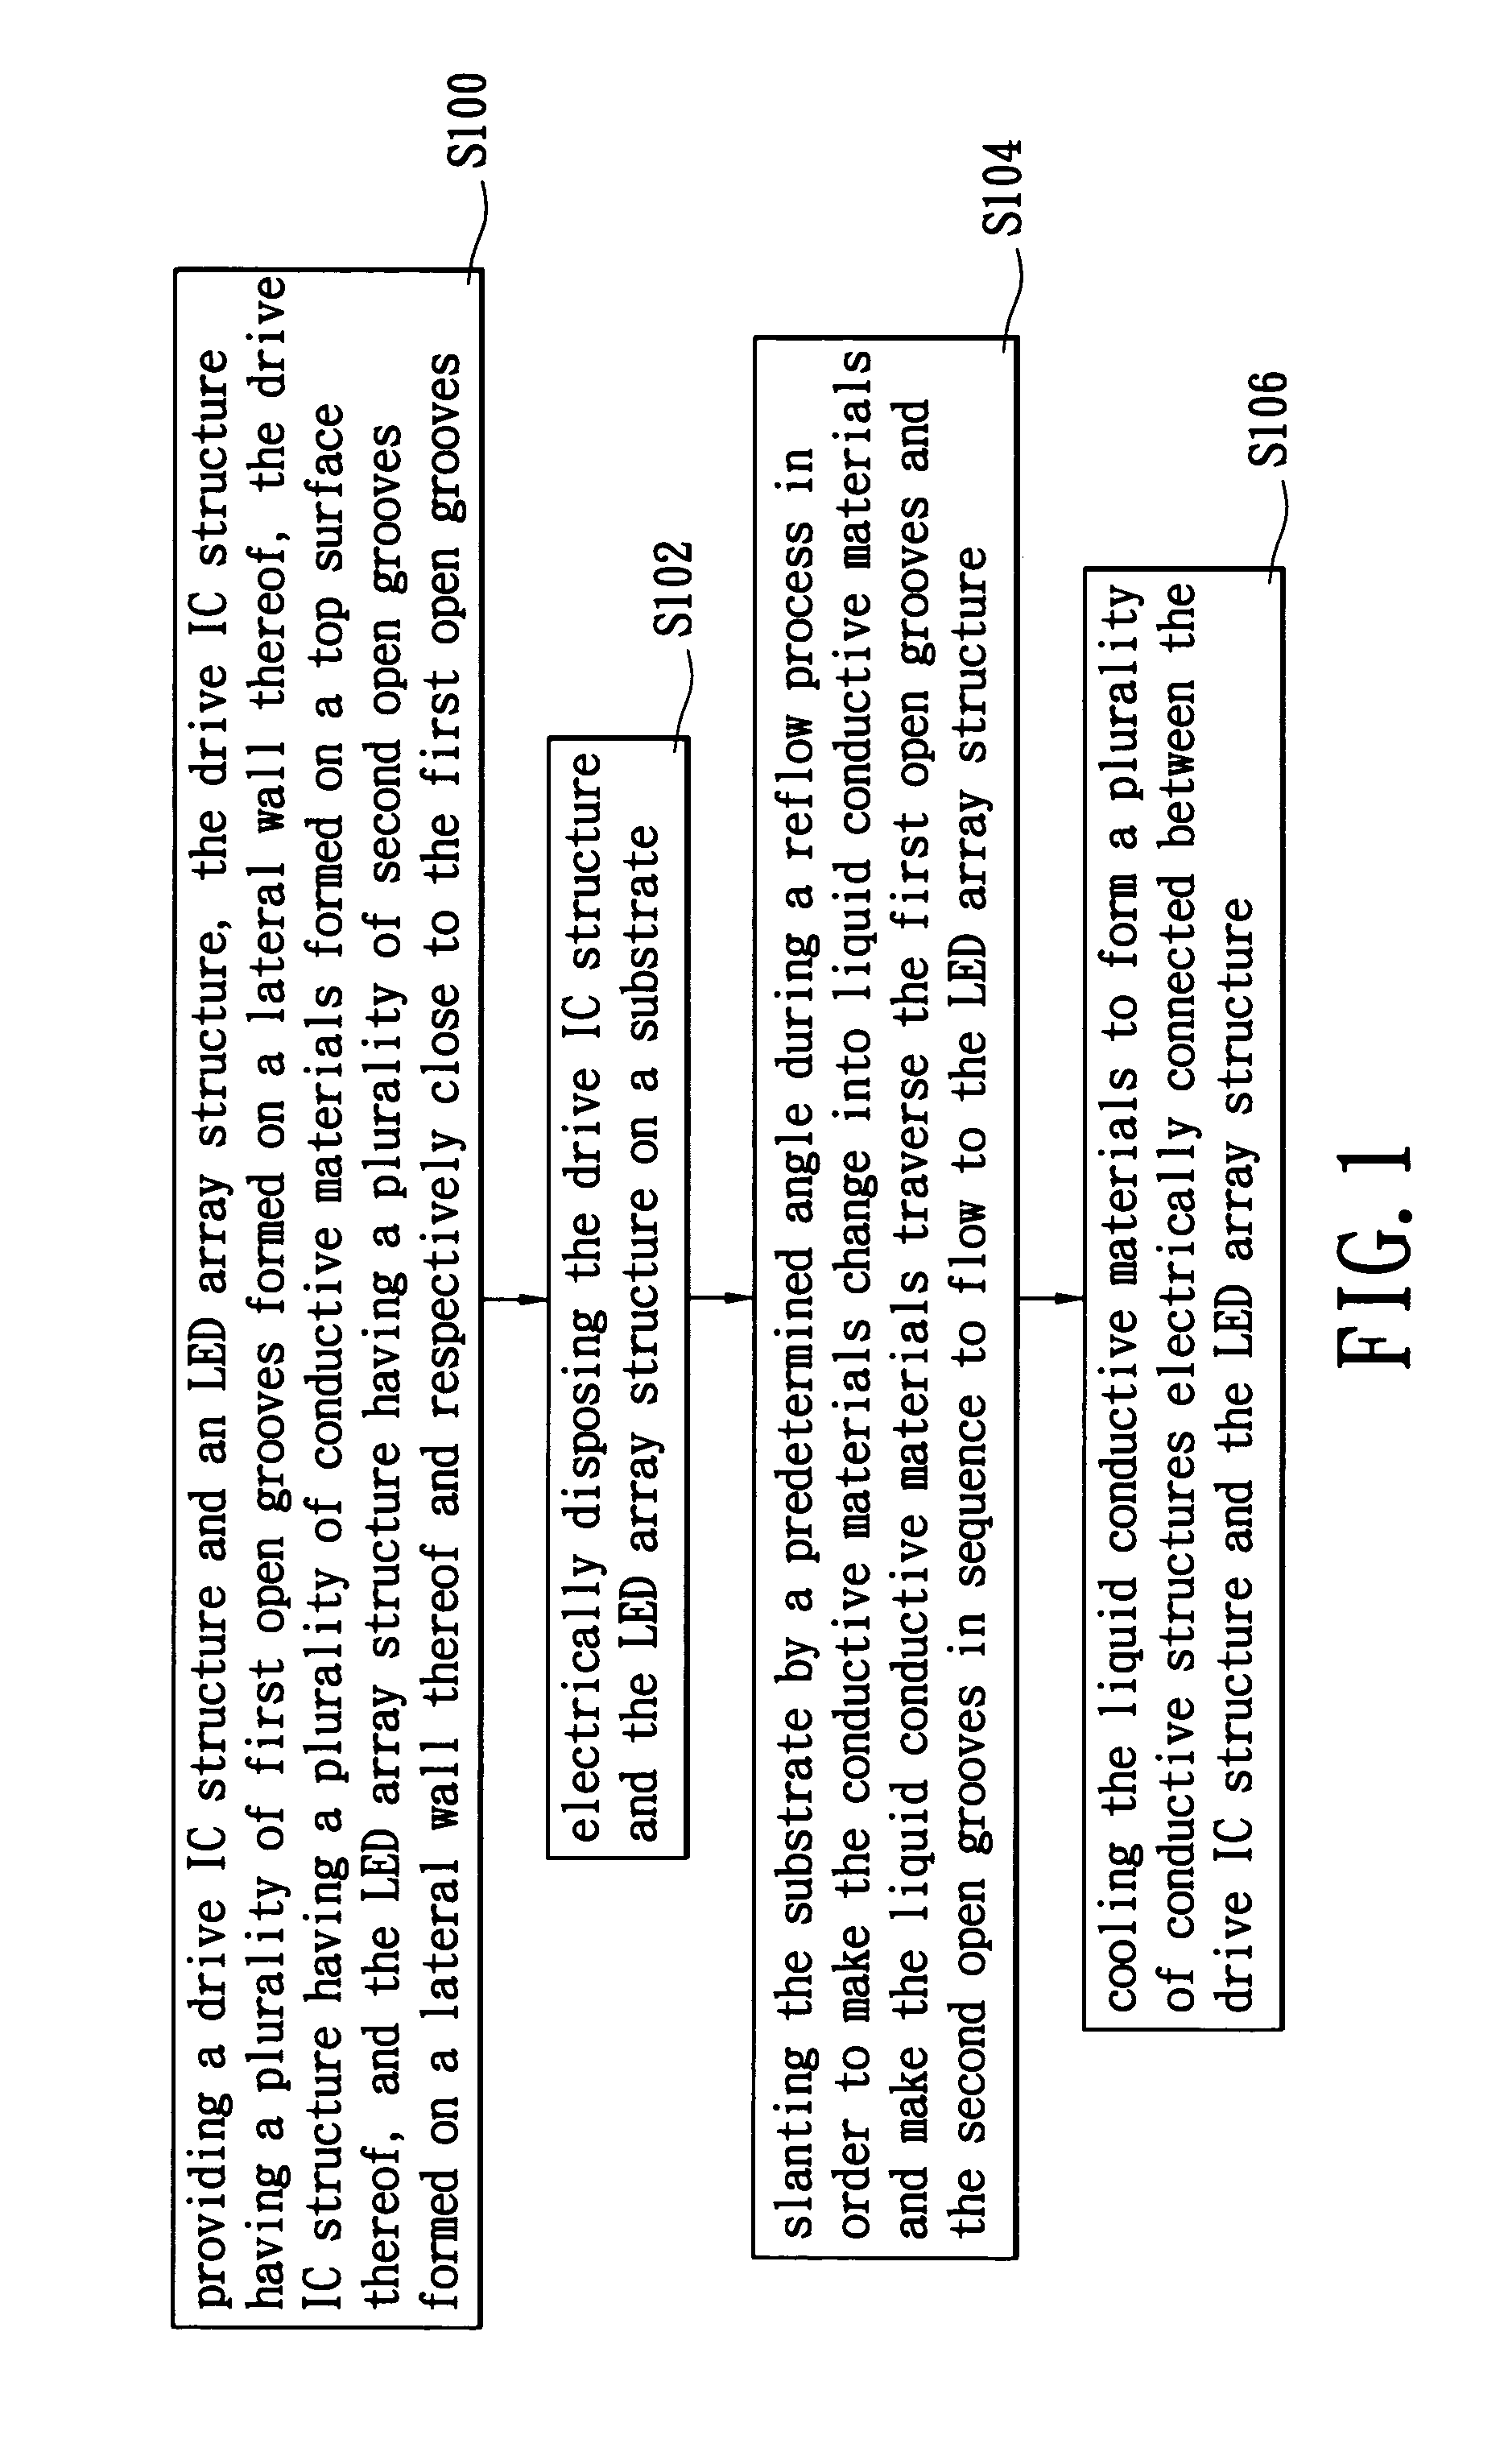 Package structure module with high density electrical connections and method for packaging the same